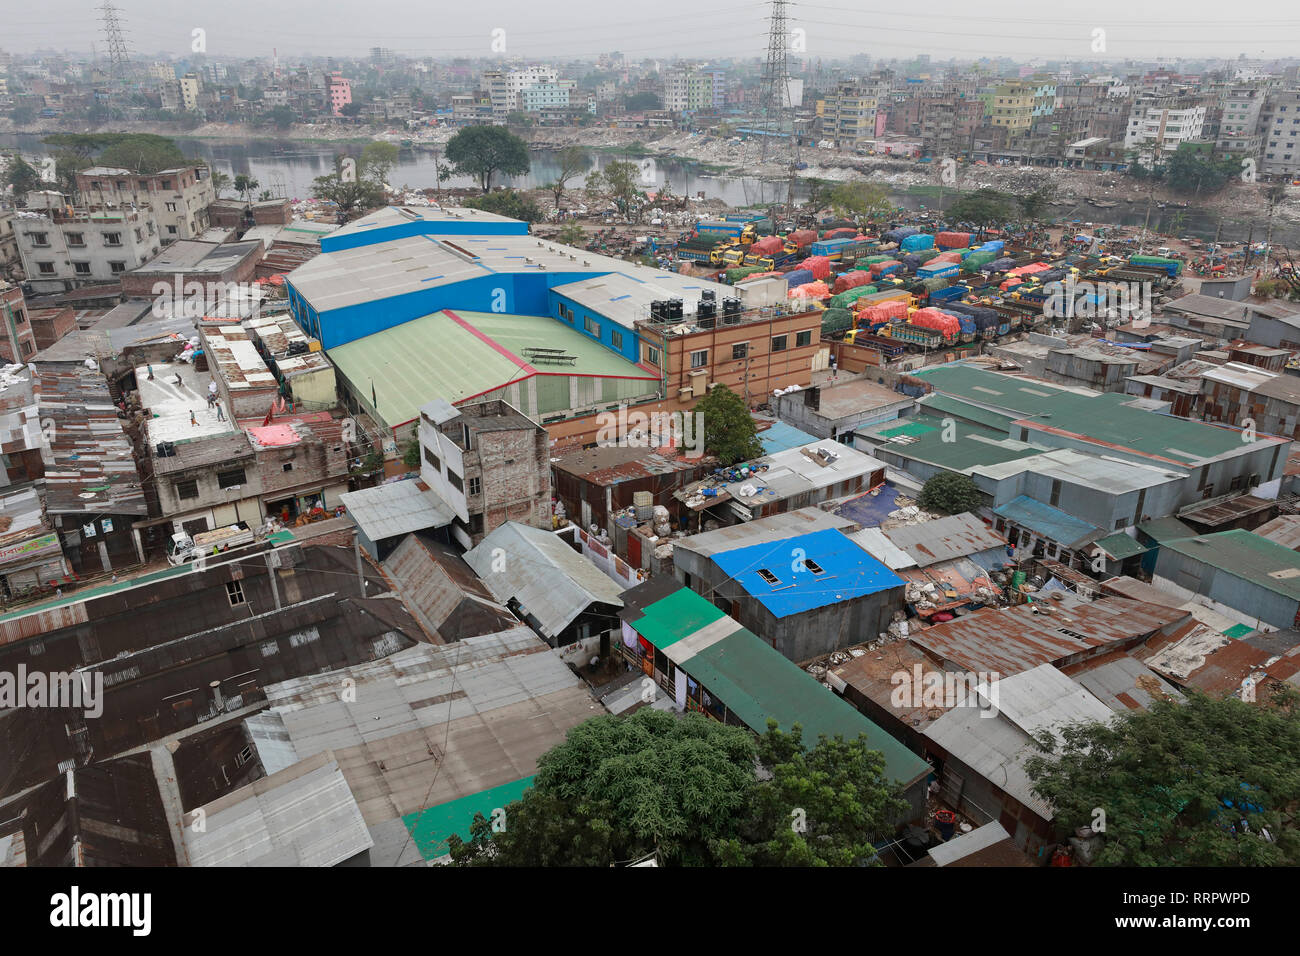 Dhaka, Bangladesh - February 26, 2019: A view of the Dhaka Metropolitan city Lalbagh area Dhaka. A city of over 15 million people, appears to be bursting at the seams. It presents, almost everywhere, a spectacle of squalor, shanty dwellings, awful traffic congestion, shortage of basic utility services, lack of recreation sites or natural parks and playgrounds, unclean air, intrusion of commercial establishments and manufacturing into residential areas, etc. Credit: SK Hasan Ali/Alamy Live News Stock Photo